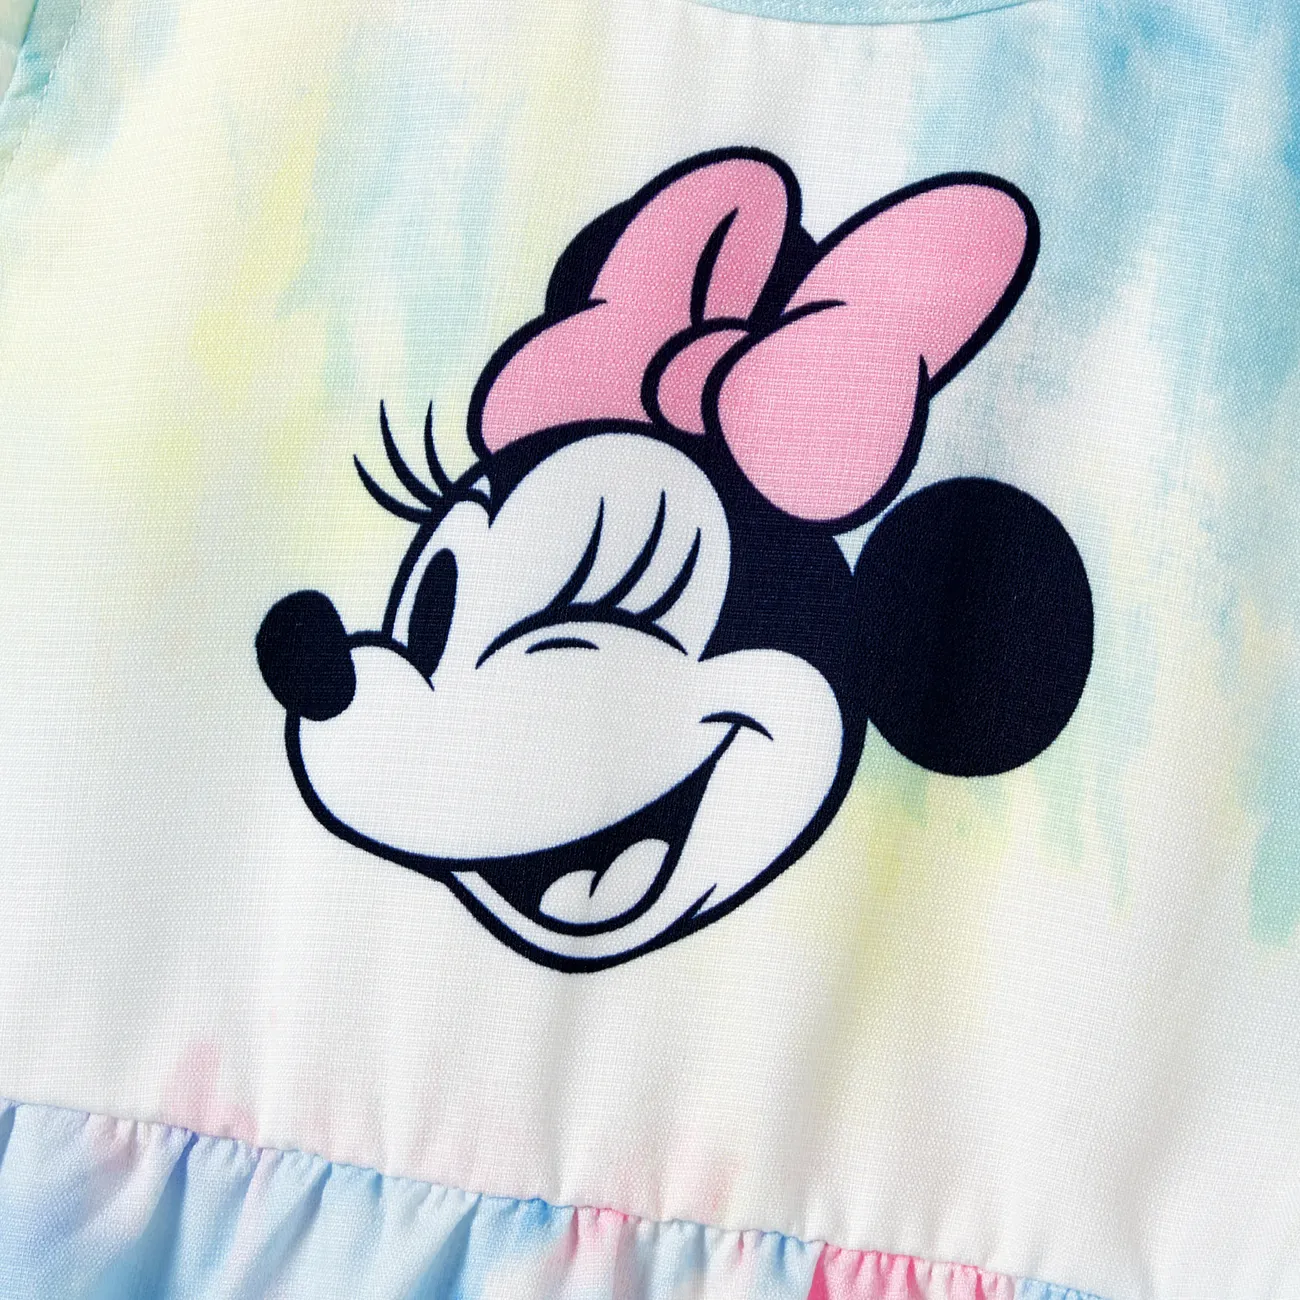 Disney Mickey and Friends Family Matching Boy/Girl Tie-dye Gradient Character Print T-shirt/Dress Multi-color big image 1